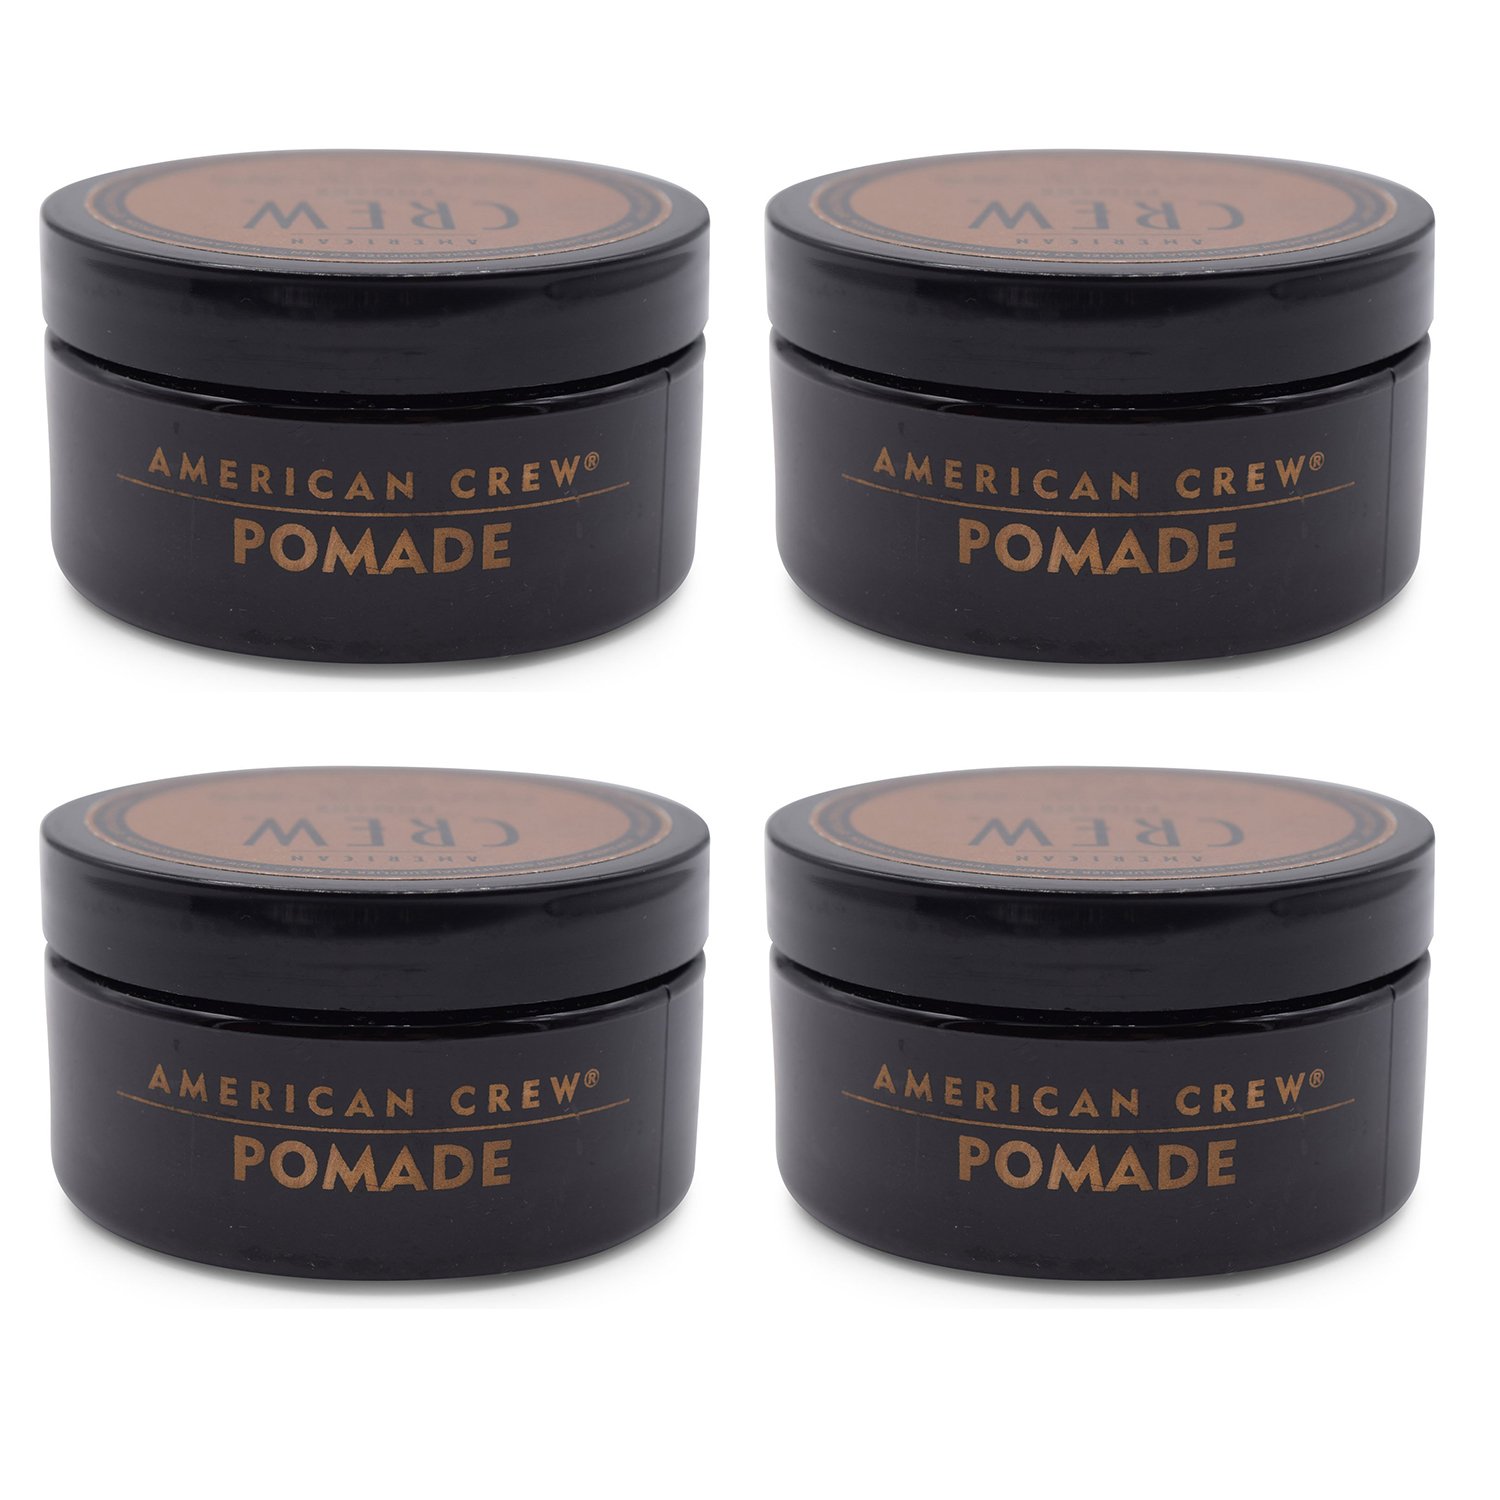 AMERICAN CREW POMADE 4 PACK 3OZ - image 1 of 1